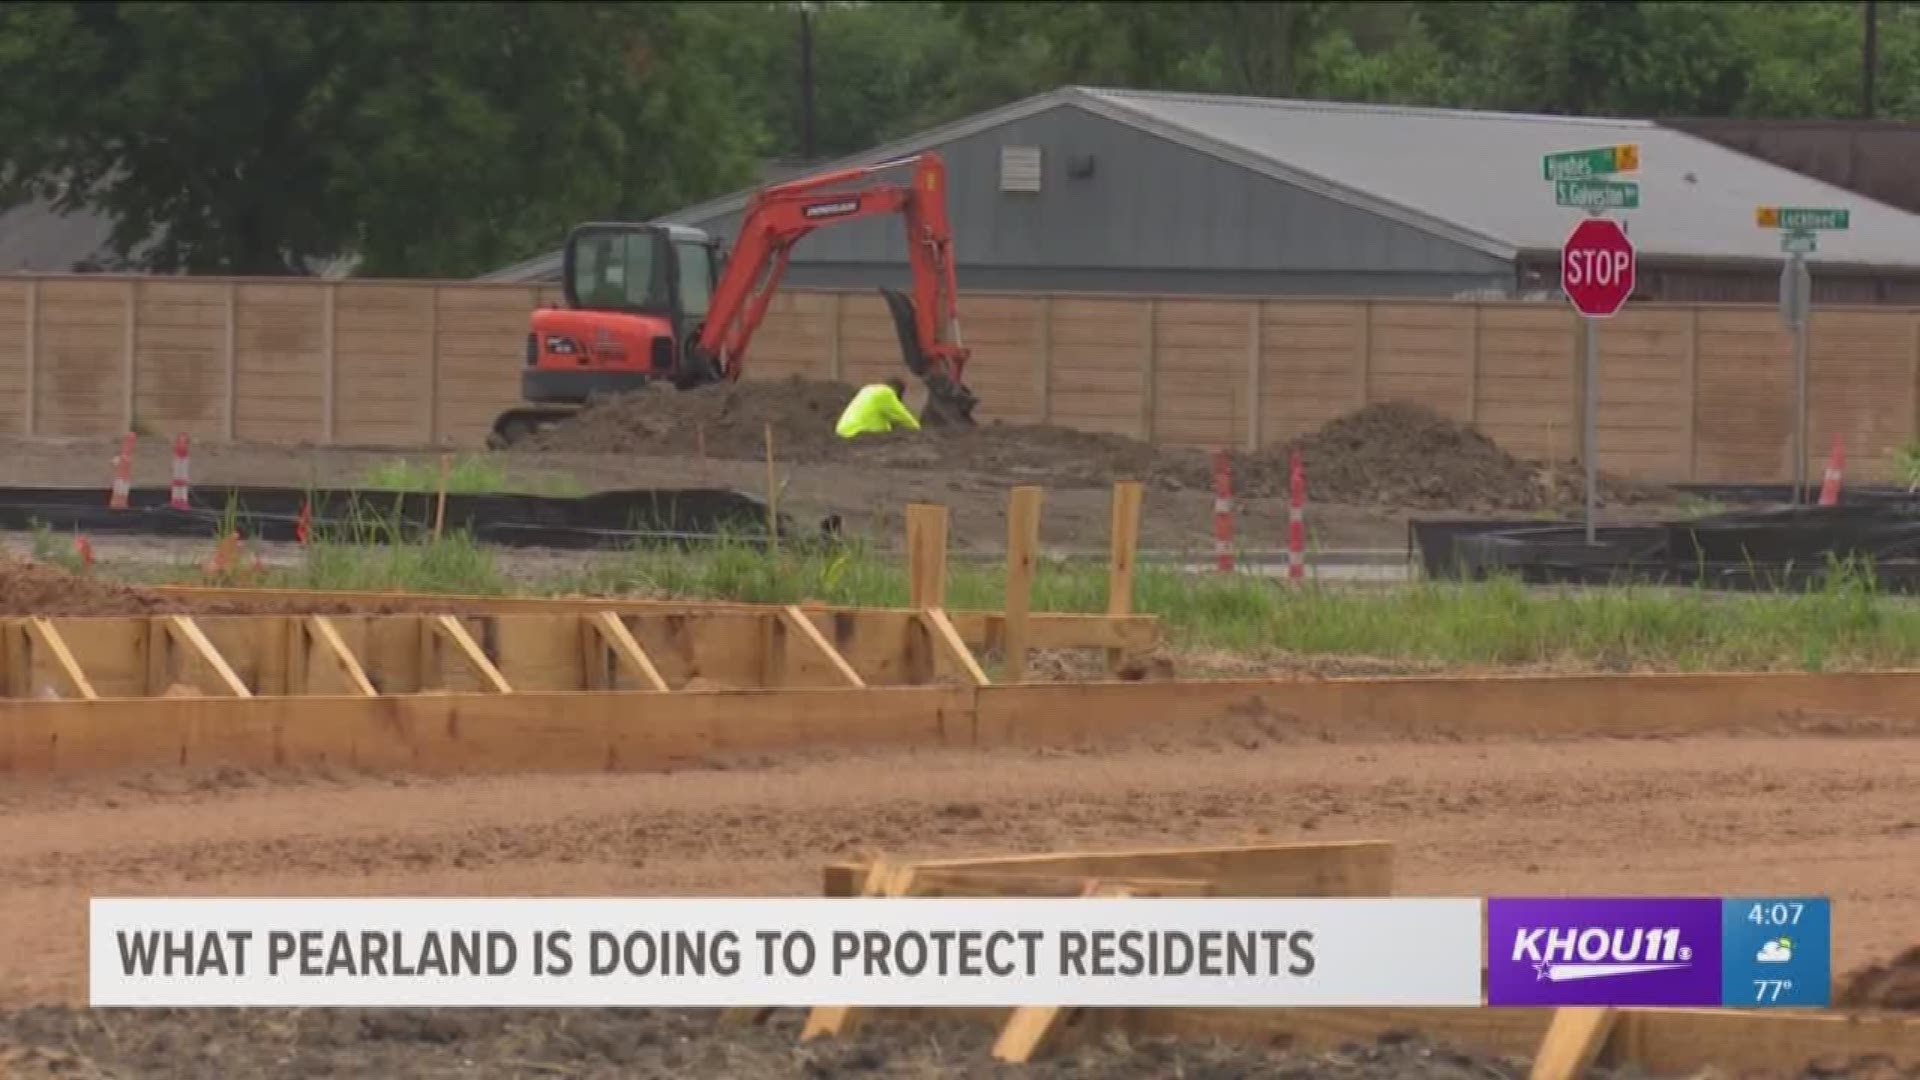 As Pearland continues to grow, so do the number of projects the city is working on to make sure that flooding remains under control.